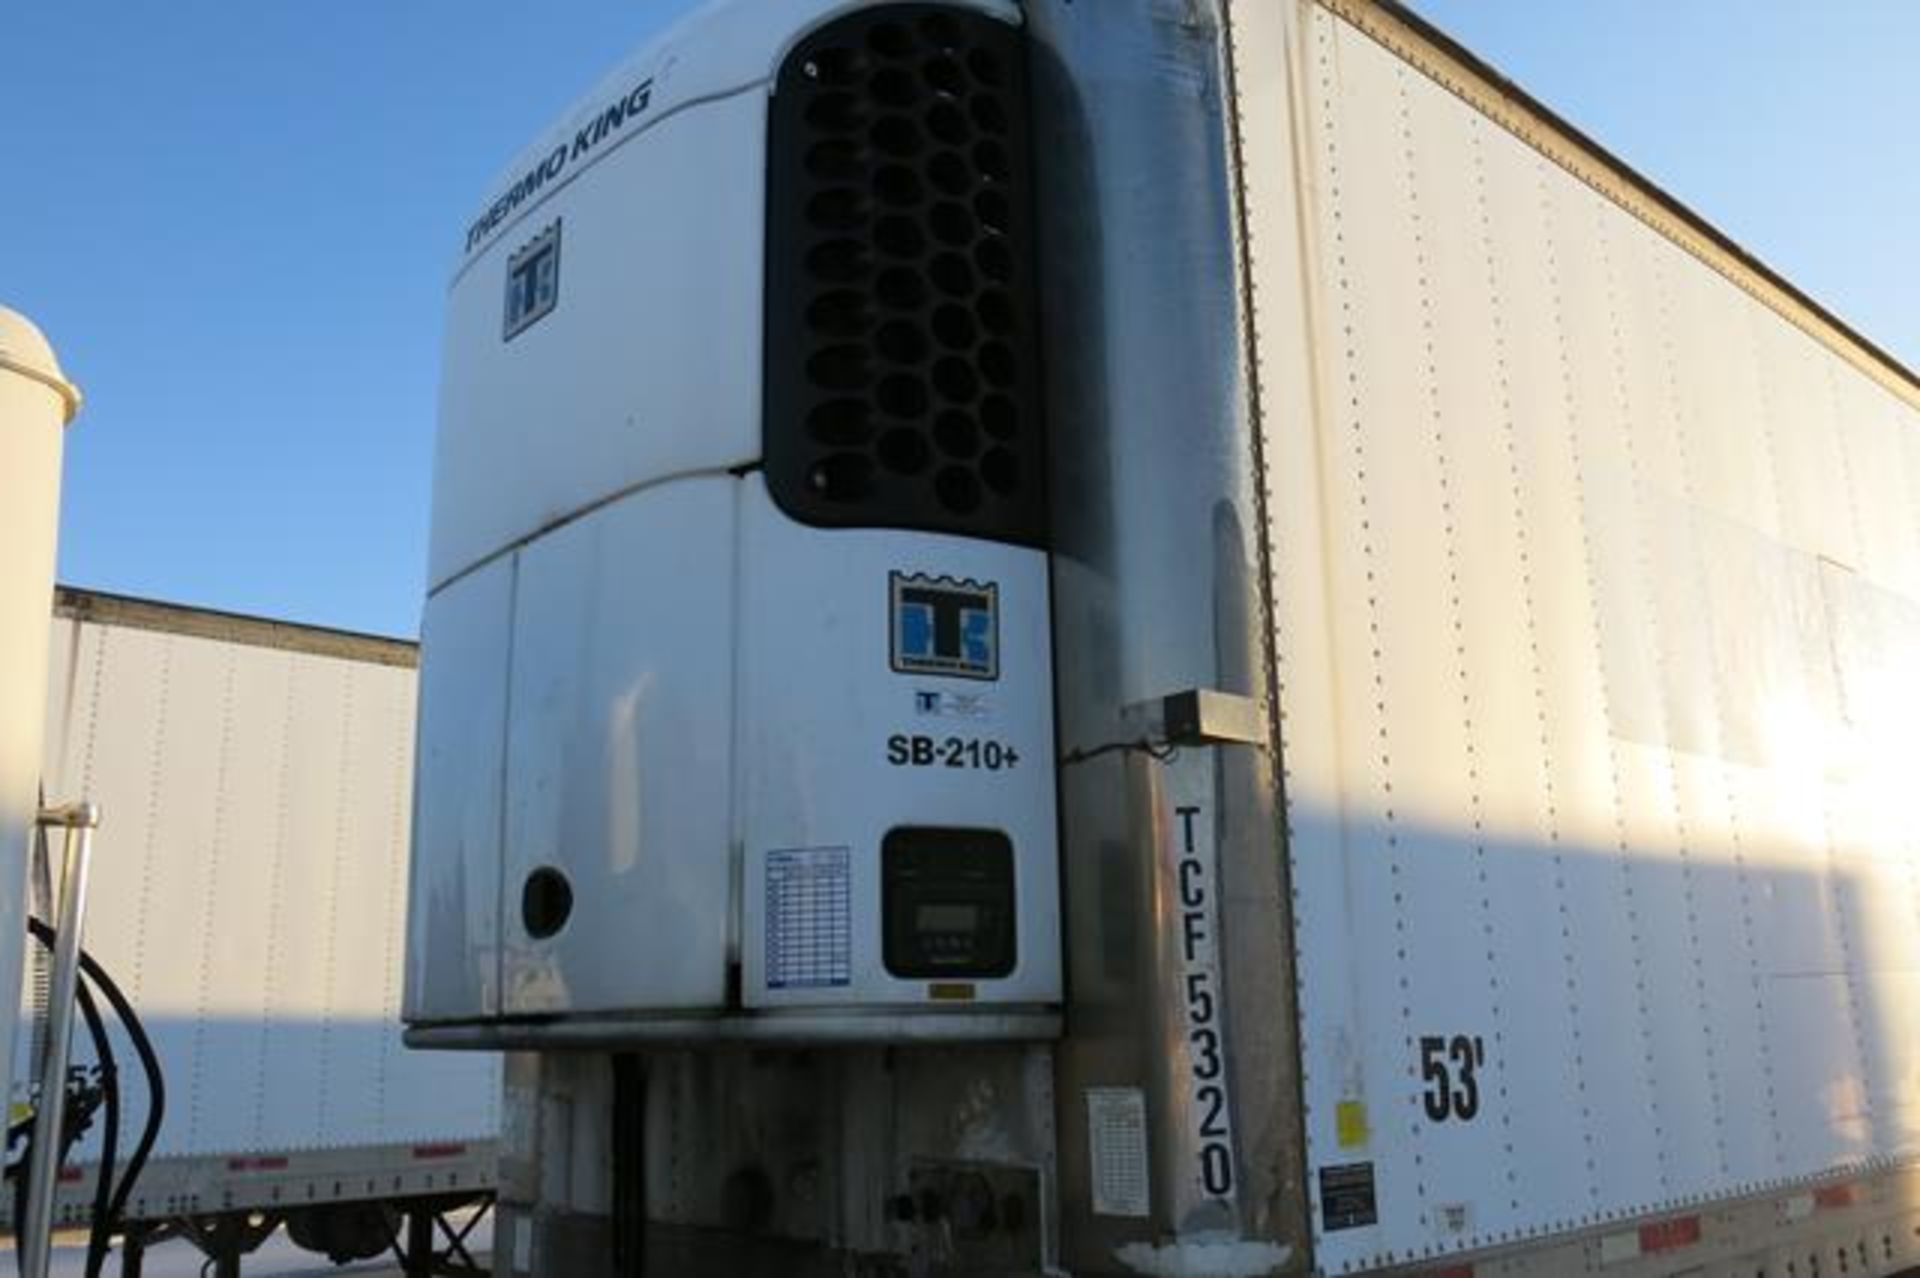 TRAILMOBILE, 53' REFRIGERATED VAN TRAILER, ROLLUP DOOR, THERMO KING, SB-210+, REEFER, 9,197 HOURS, - Image 4 of 13